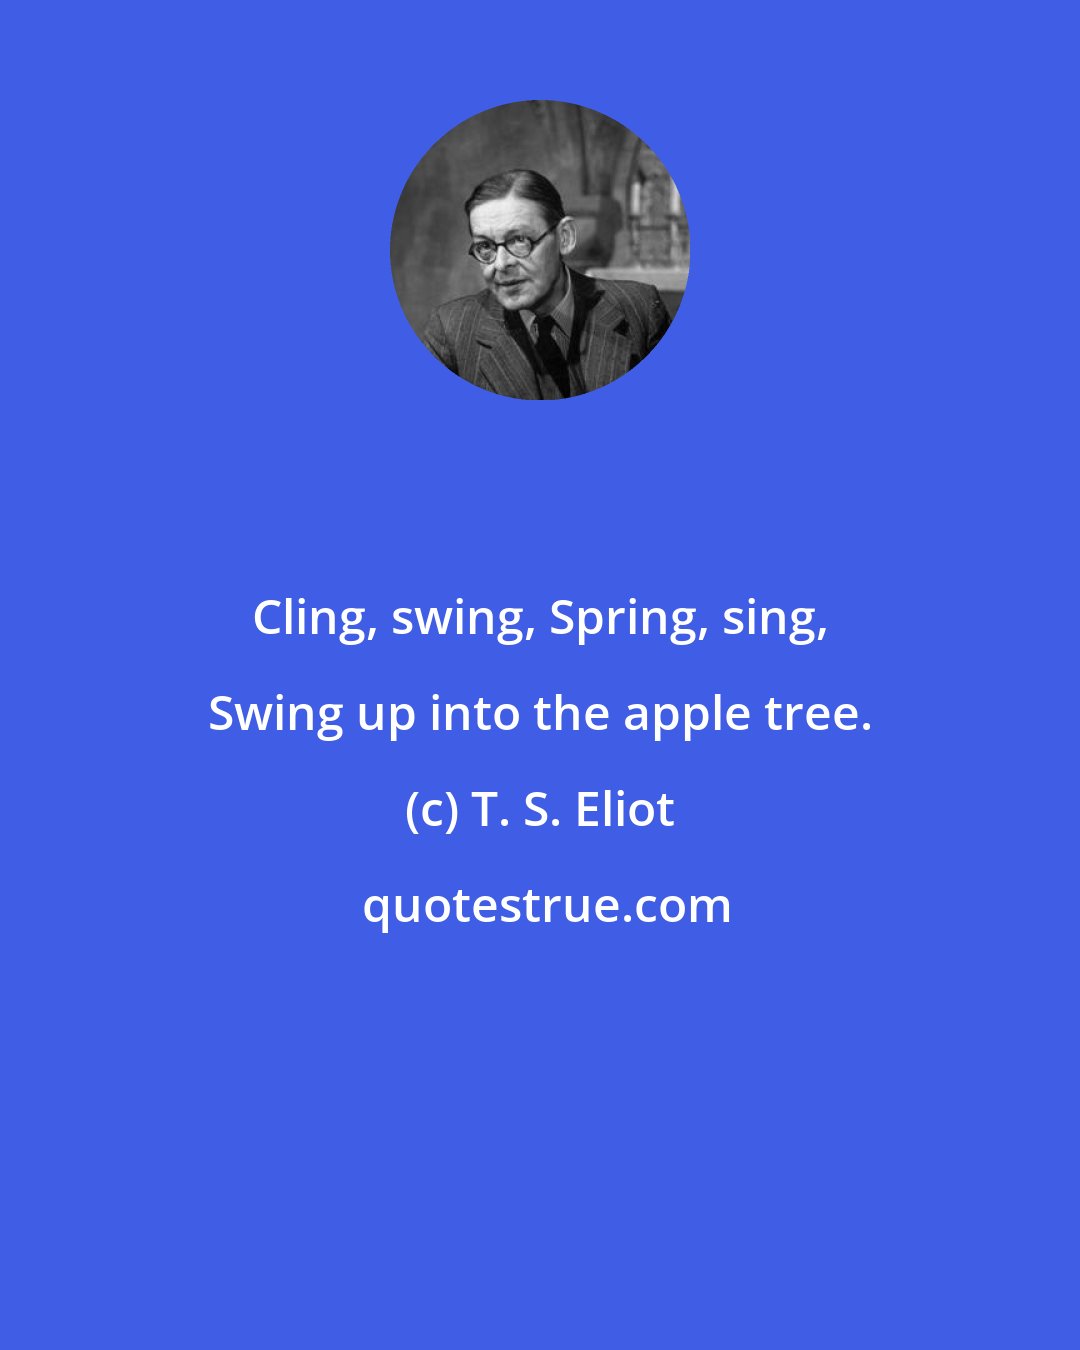 T. S. Eliot: Cling, swing, Spring, sing, Swing up into the apple tree.